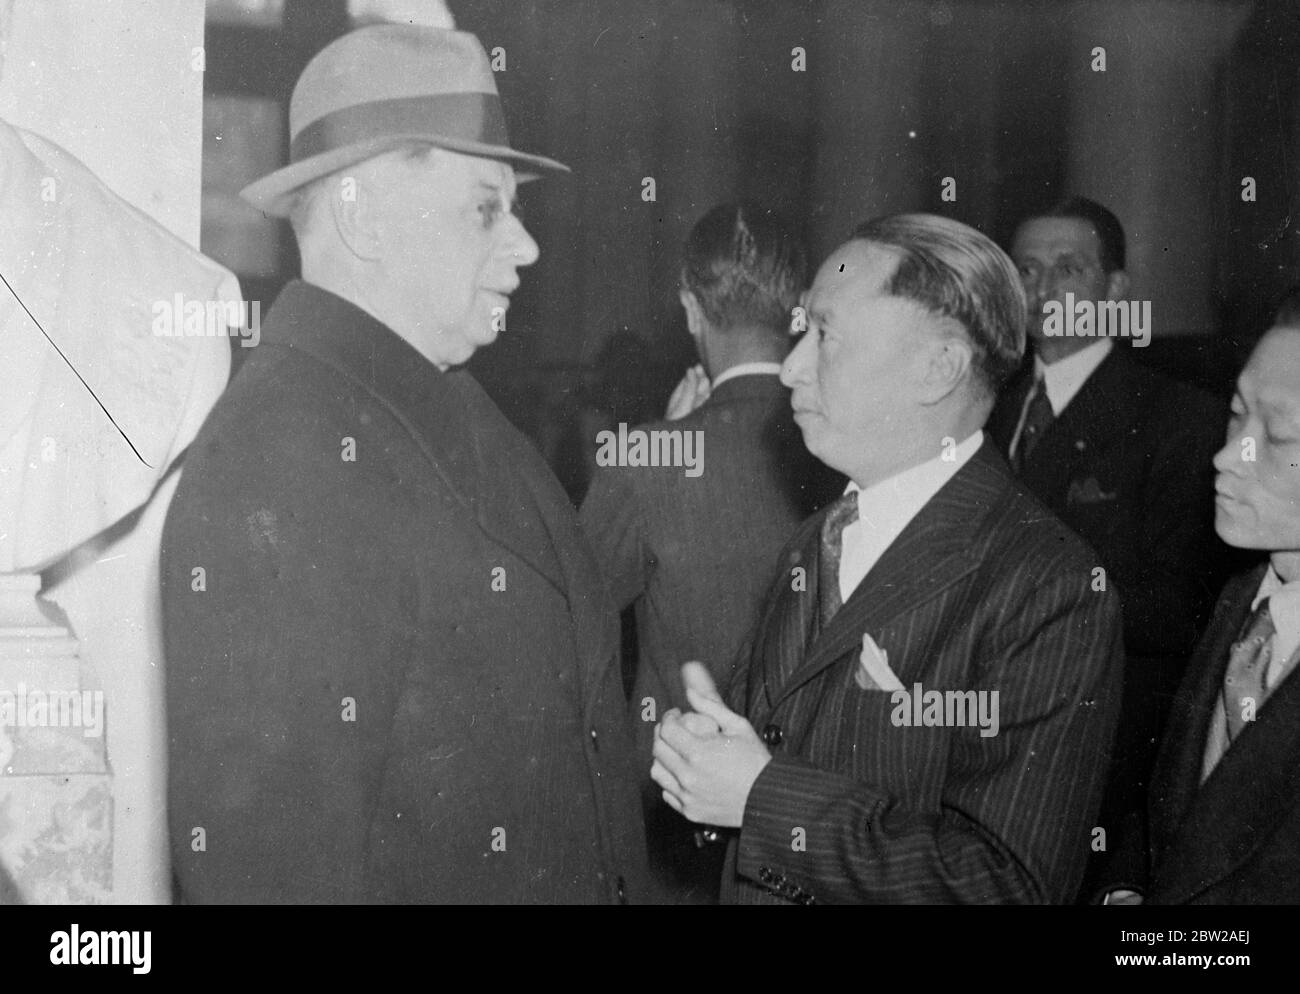 Chinese representatives talk with new Russian delegate at Brussels conference. Private talks are taking place between delegates to the Nine Power Conference on the Sino-Japanese war in Brussels following the deadlock caused by the Japanese refusal to take part in the deliberations. Photo shows, Mr Wellington Koo, the Chinese representative (right) in conversation with M Potemkin, who is representing Russia following M Litvinoff's sudden departure from the conference. 15 November 1937 Stock Photo